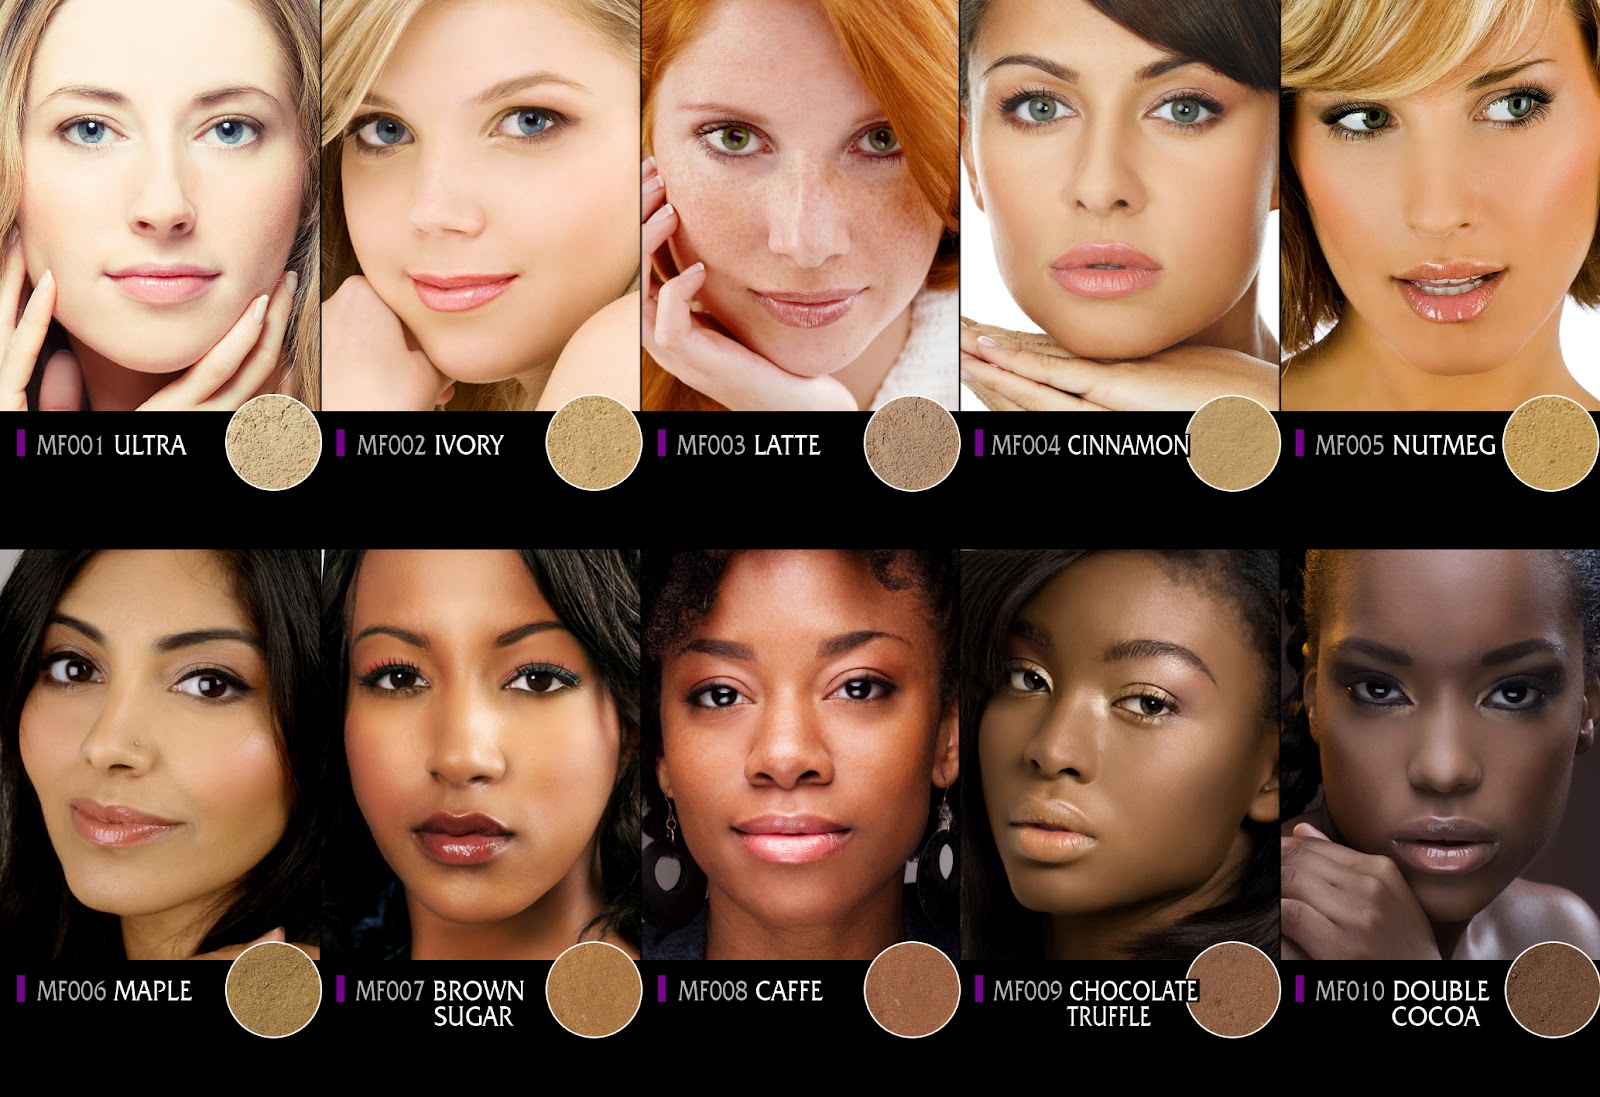 6. "Sandy Blonde Hair Guys: How to Choose the Right Shade for Your Skin Tone" - wide 1